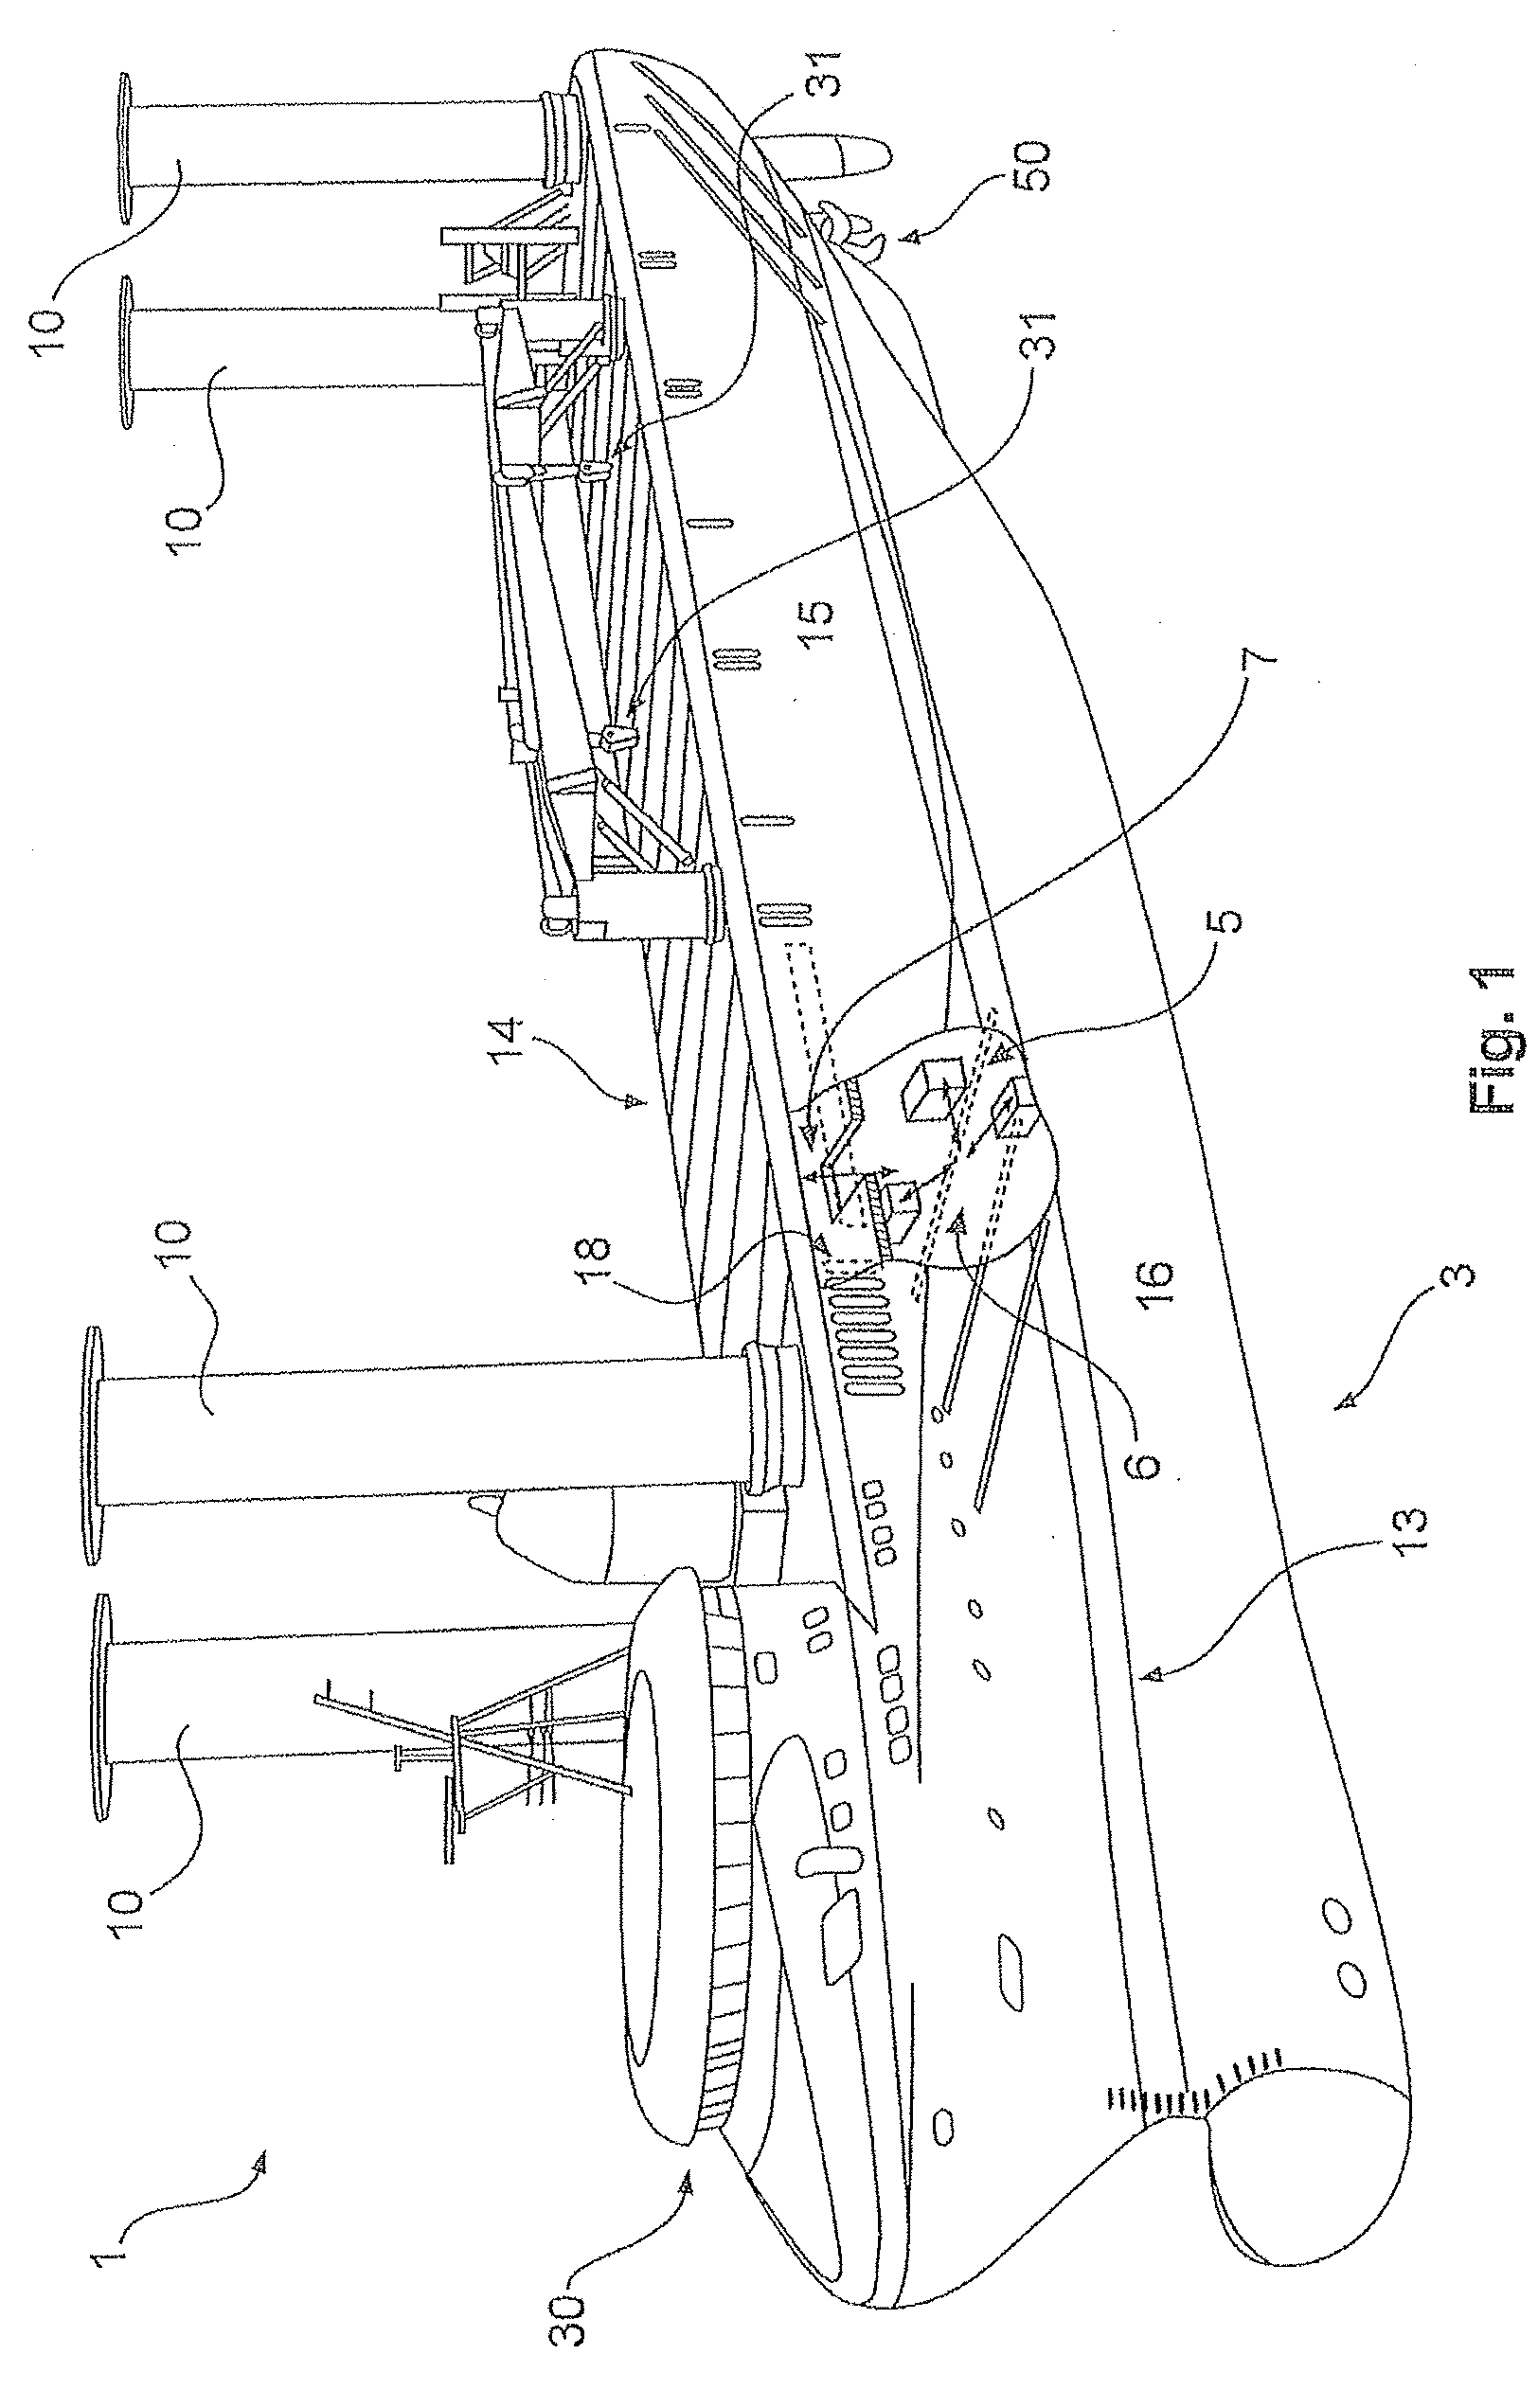 Ship having an opening for removing a power supply system